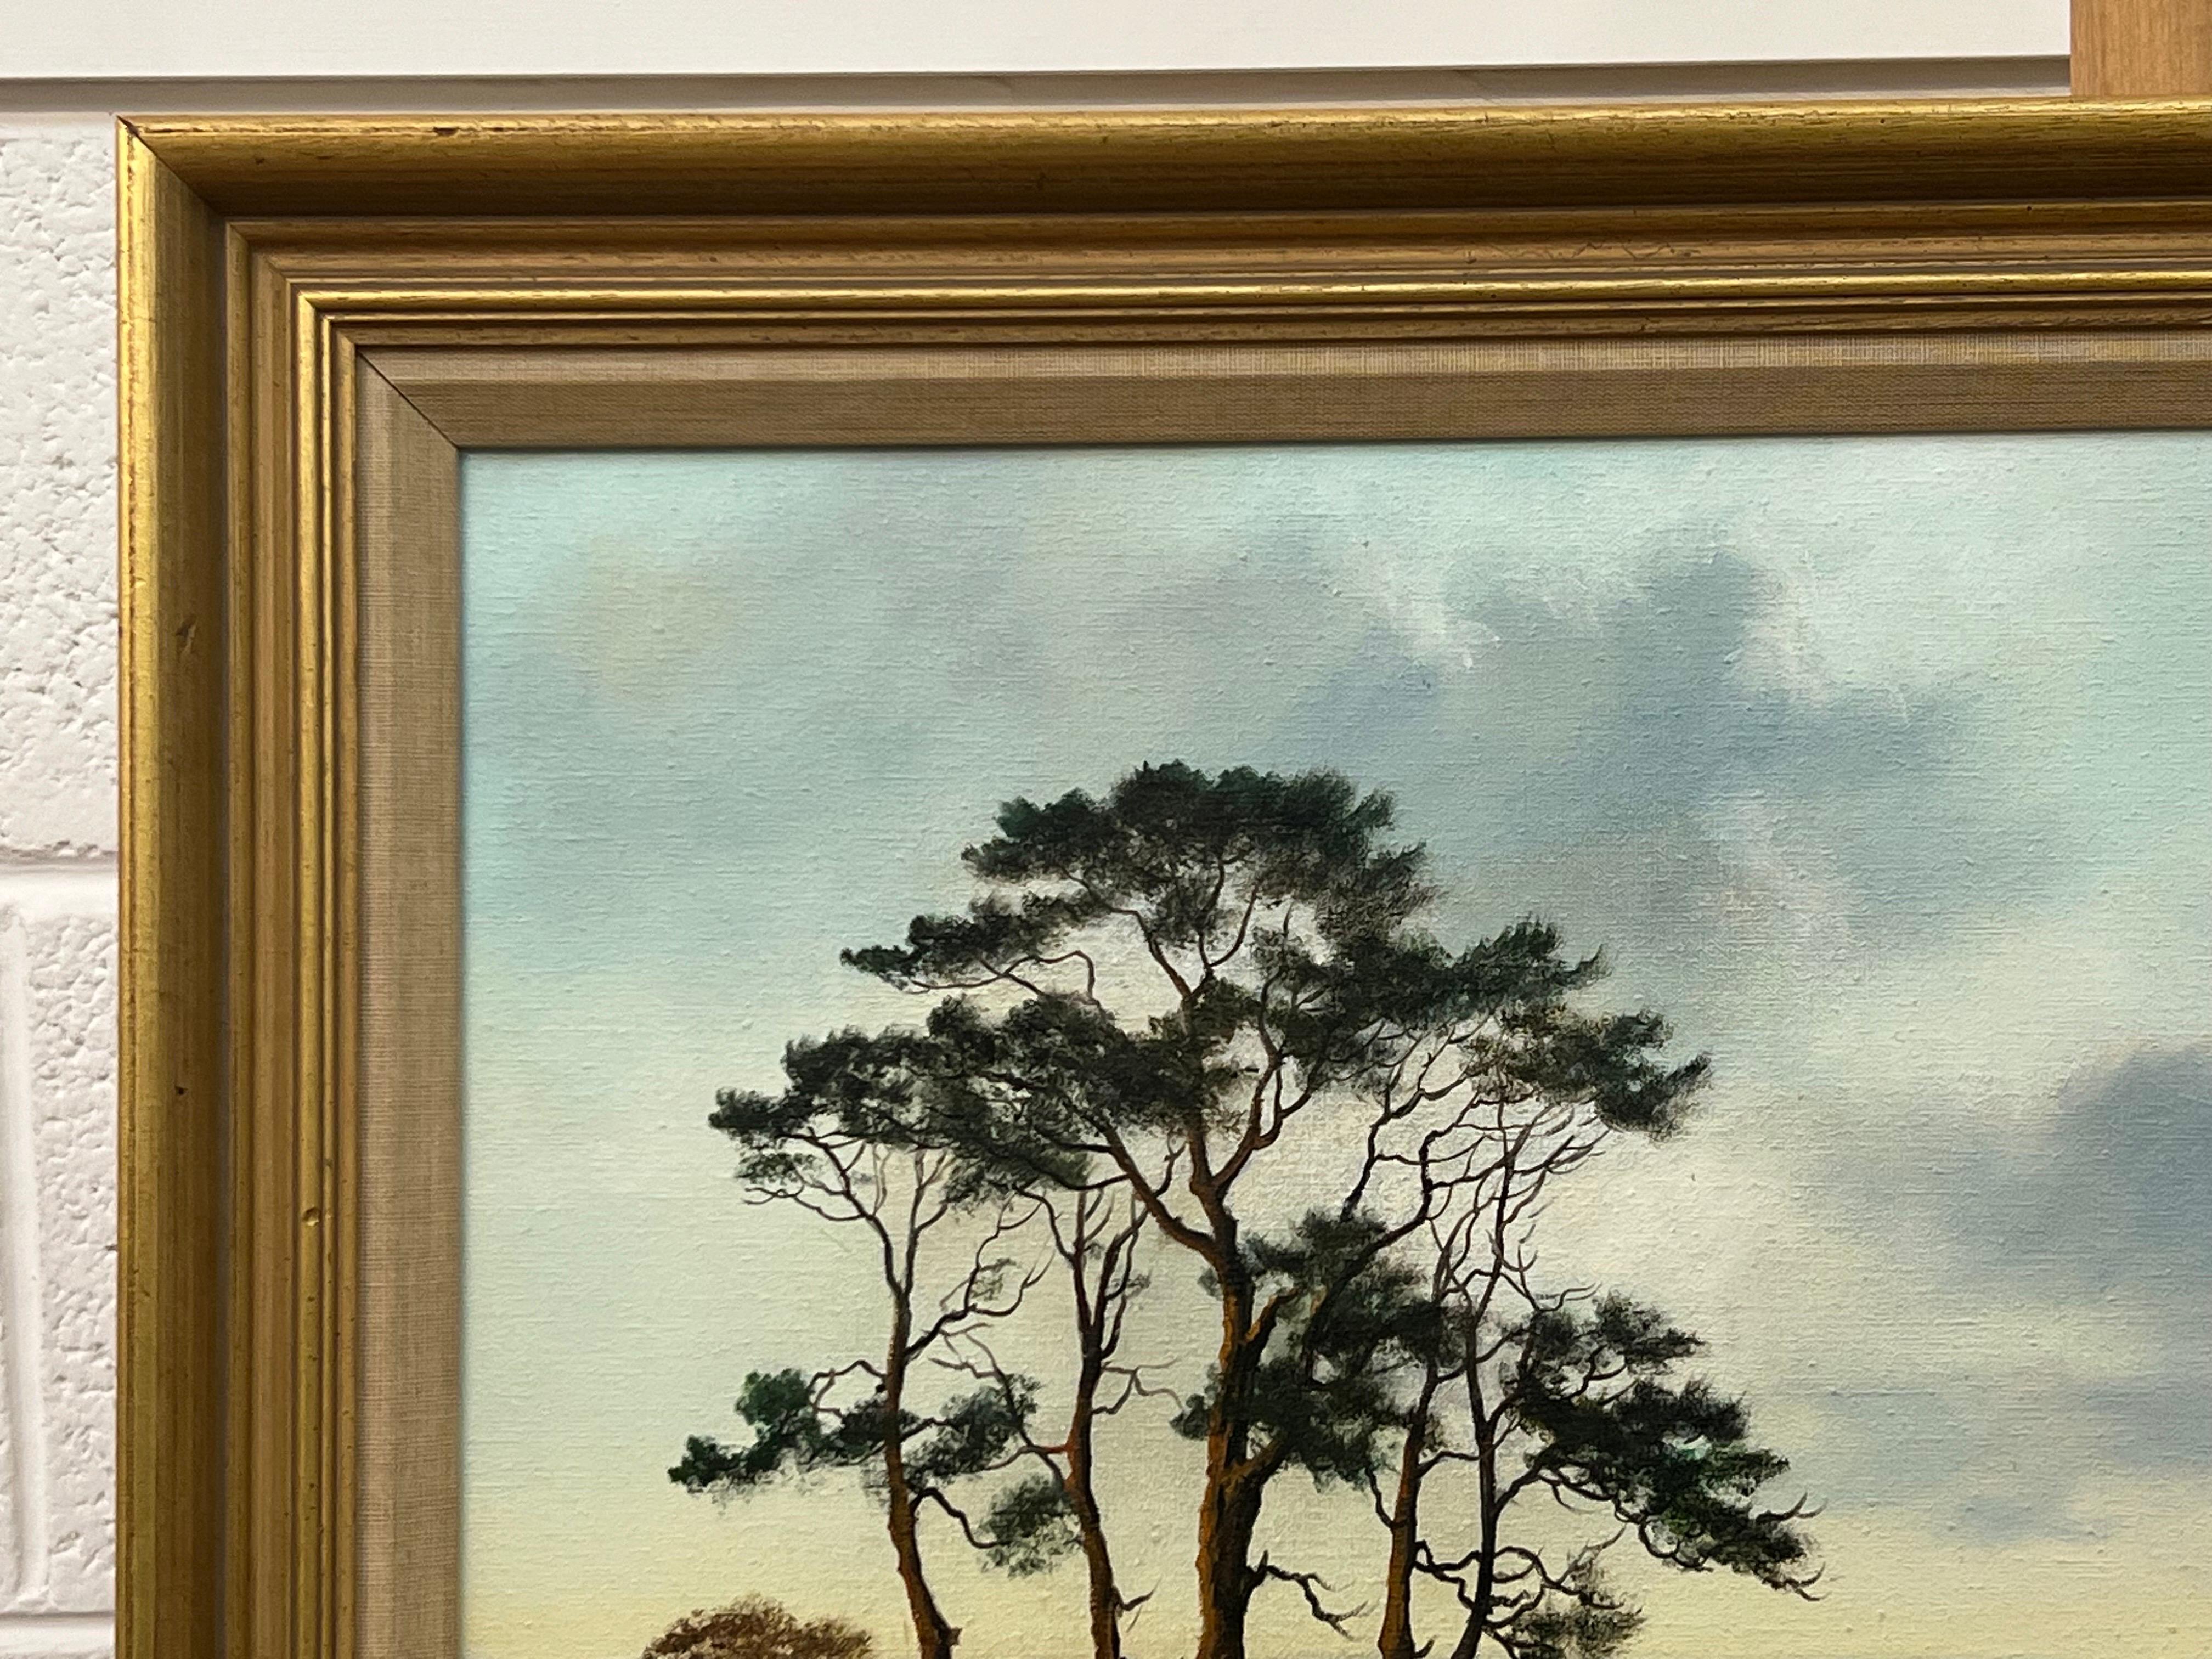 Sheep & Tree Landscape in the English Countryside by 20th Century British Artist 2